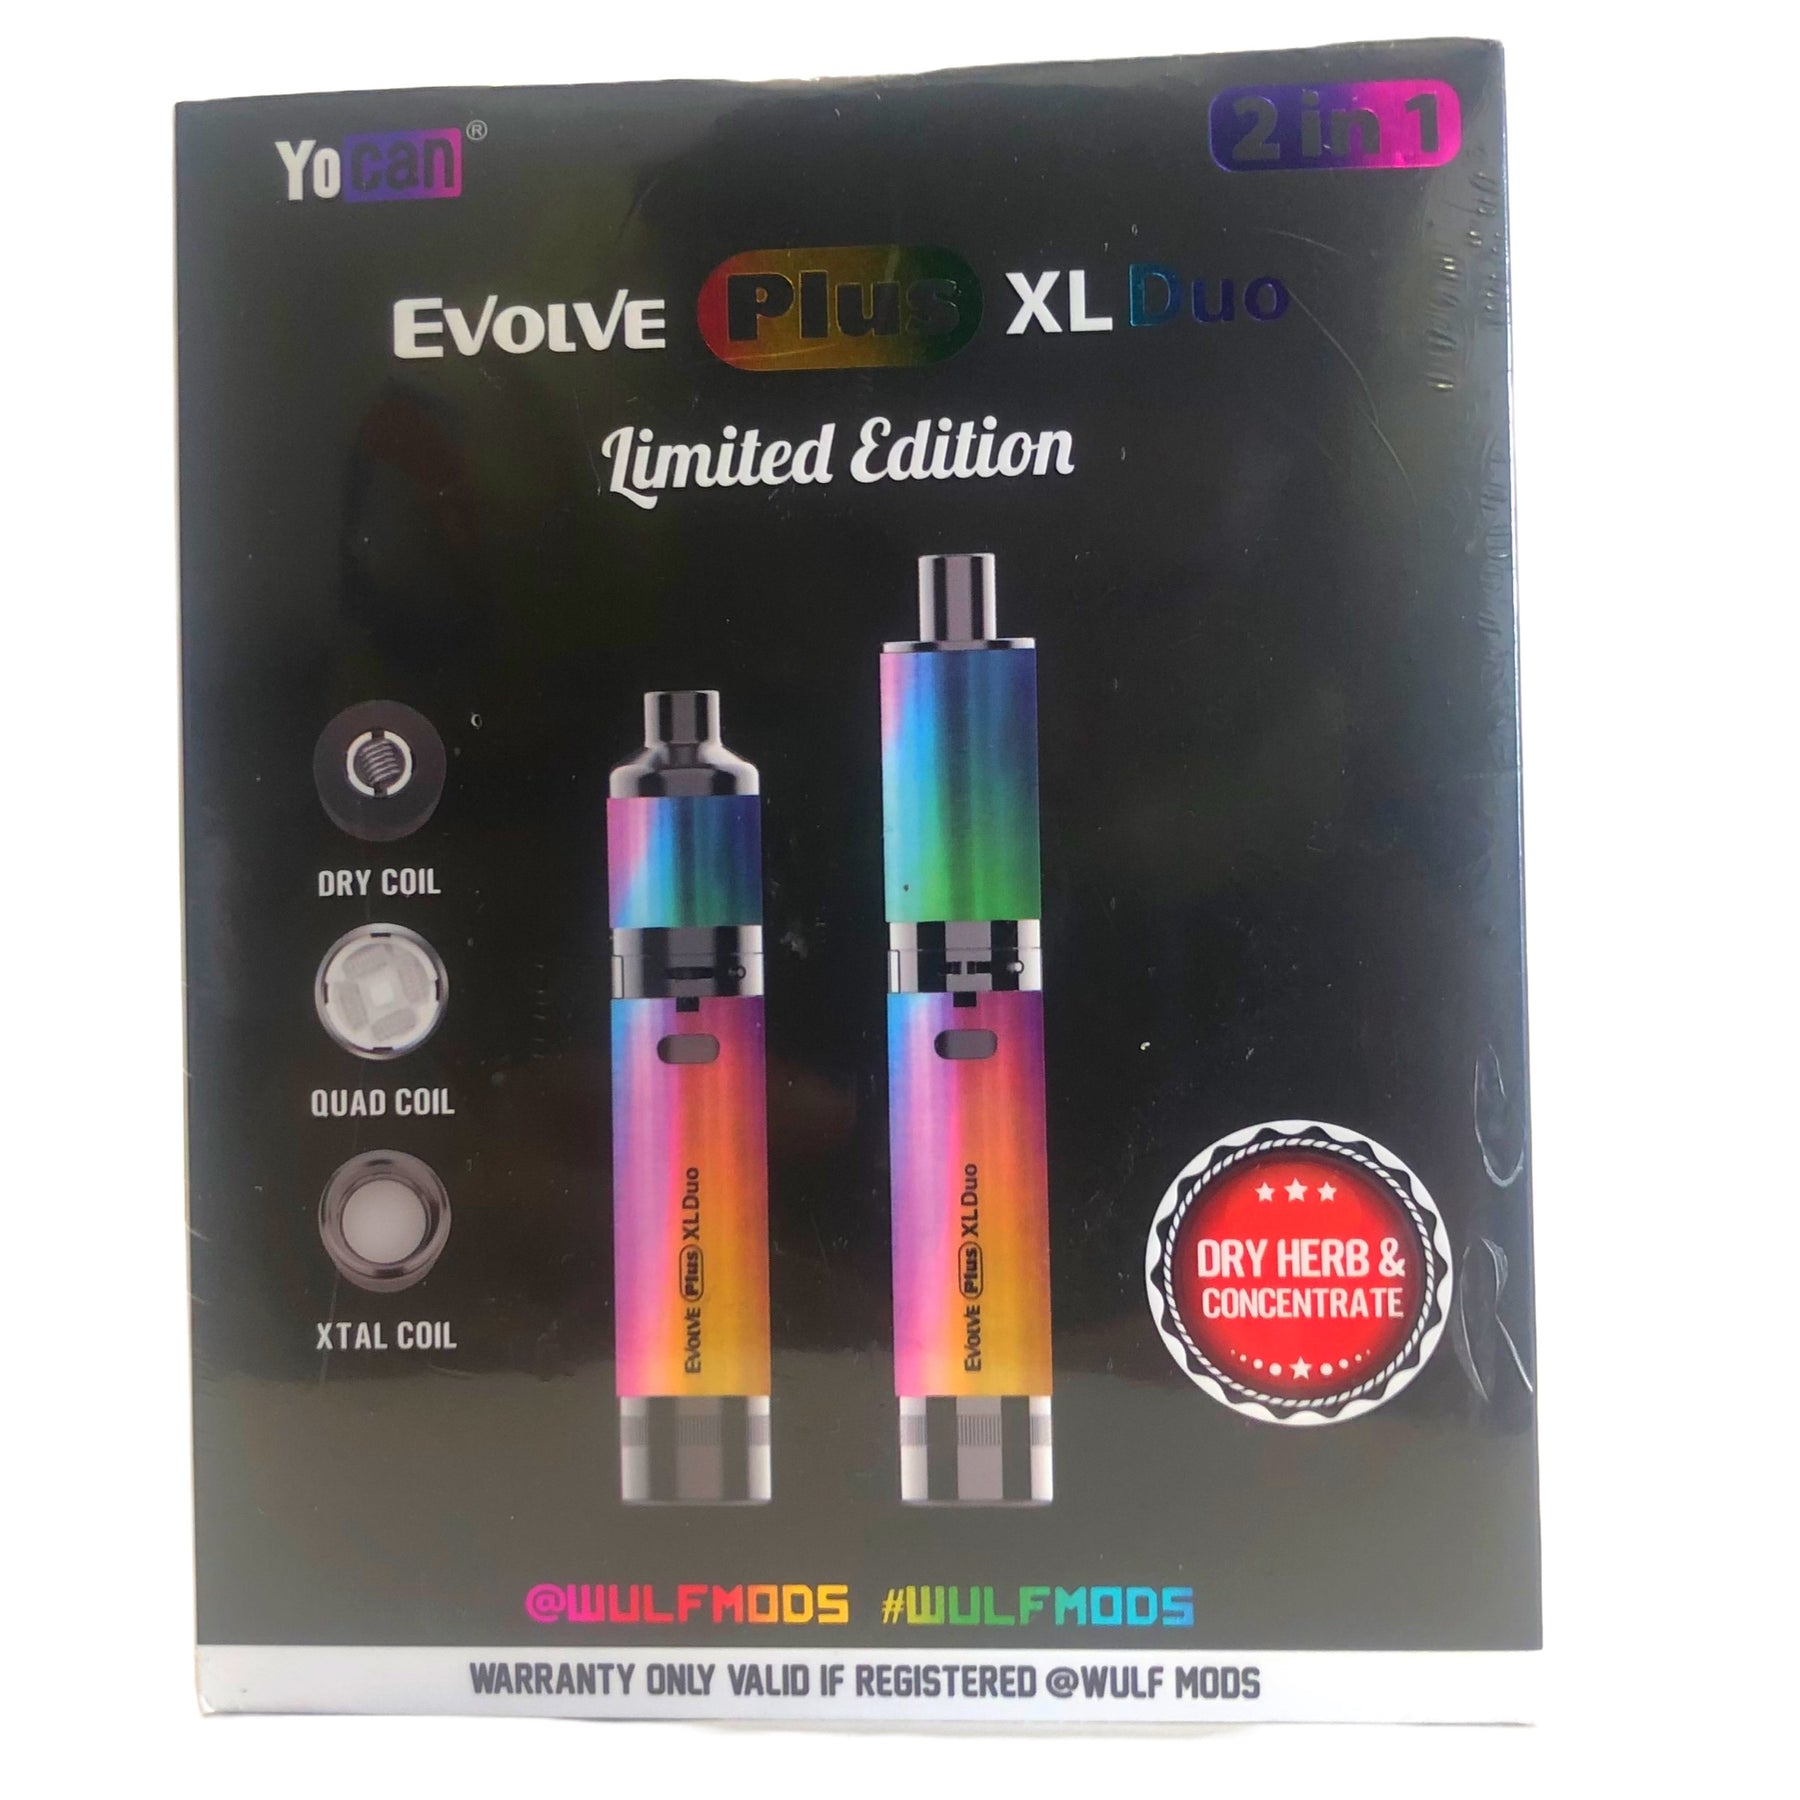 Yocan Evolve Plus XL 2 in 1 by Wulf Mods Dry Herb & Concentrate